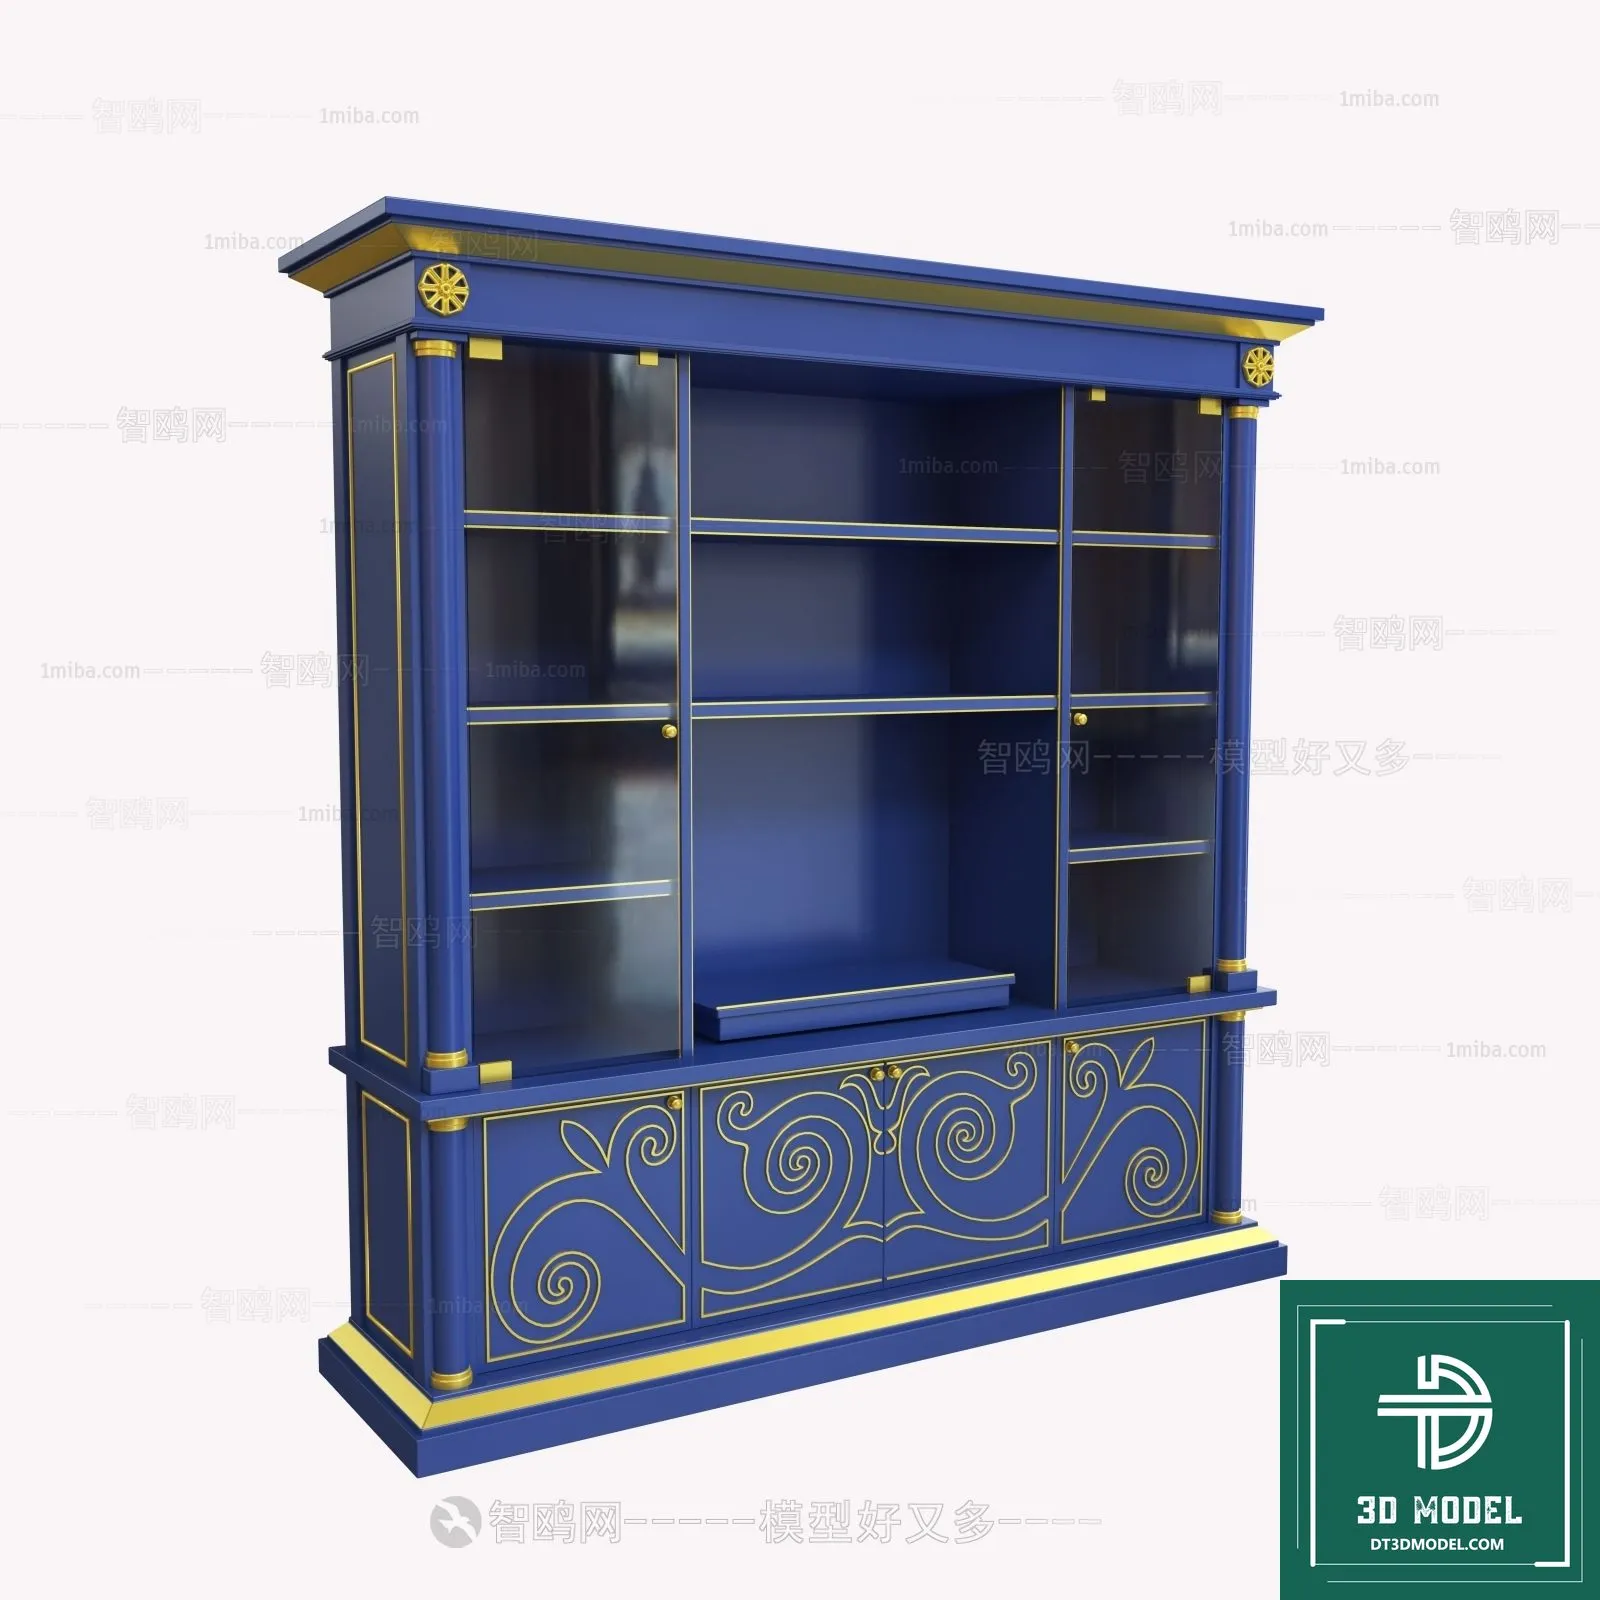 INDOCHINE STYLE – 3D MODELS – 879